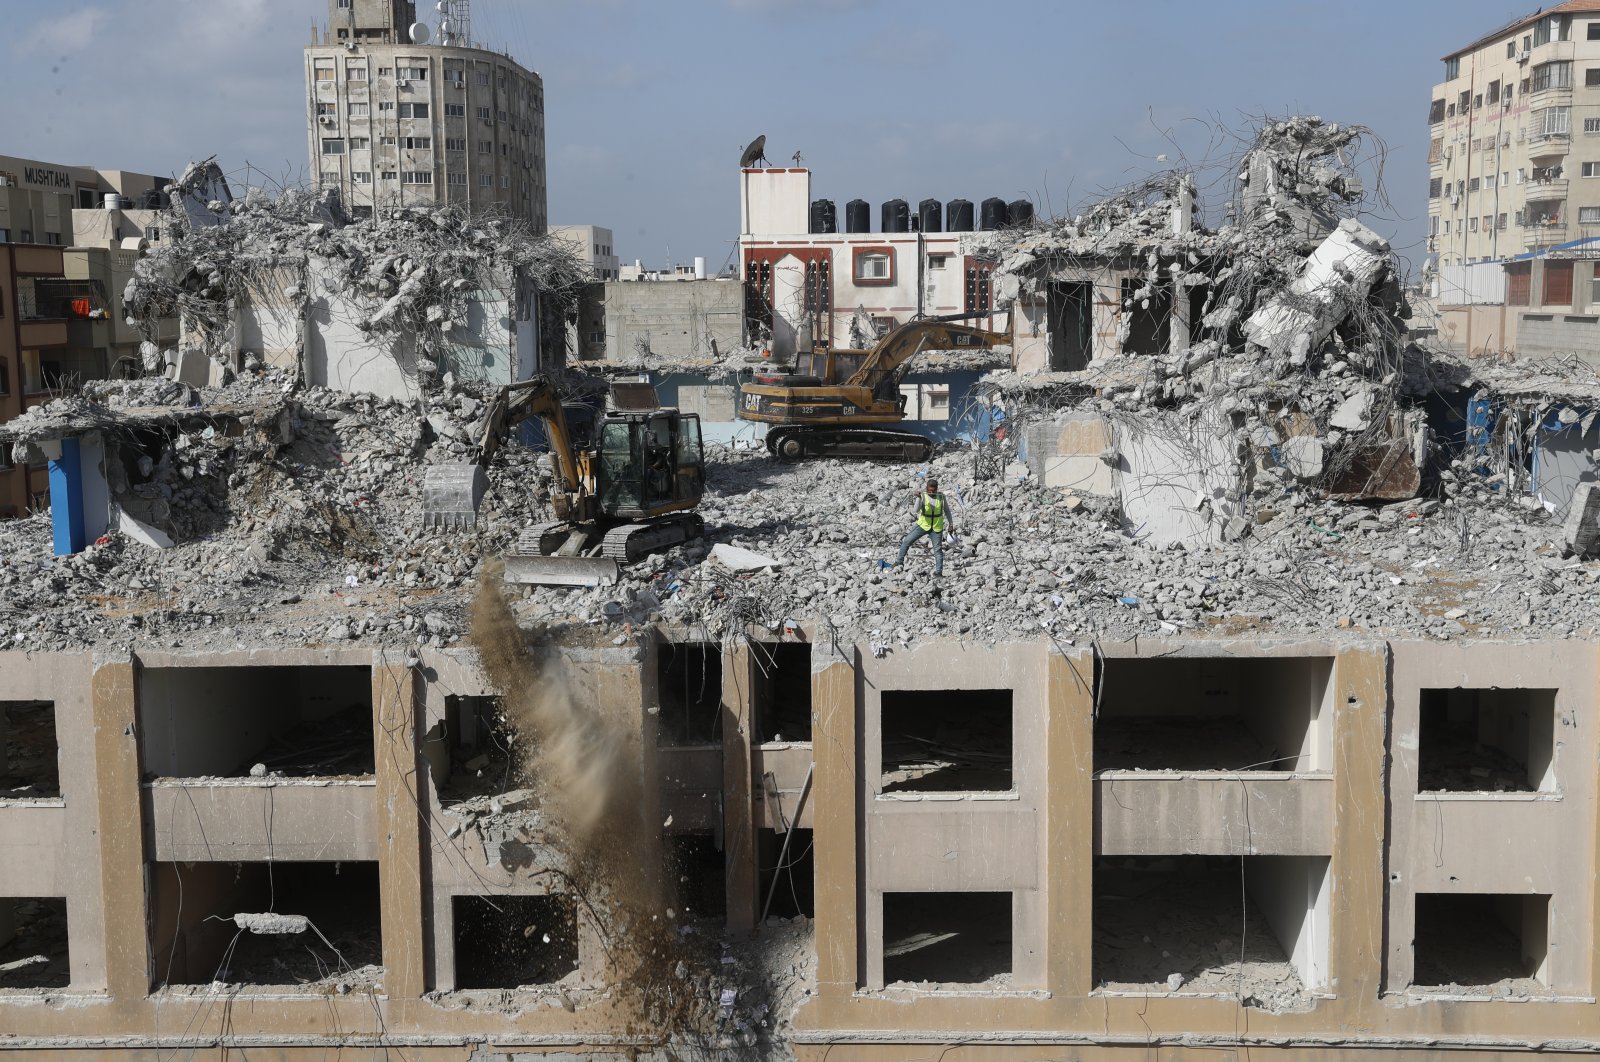 Palestinian workers use backhoes to break and remove parts of the al-Jawhara building, which was damaged by Israeli airstrikes during Israel&#039;s war with Gaza&#039;s Hamas rulers last May, in the central al-Rimal neighborhood of Gaza City, Palestine, Dec. 23, 2021. (AP Photo)